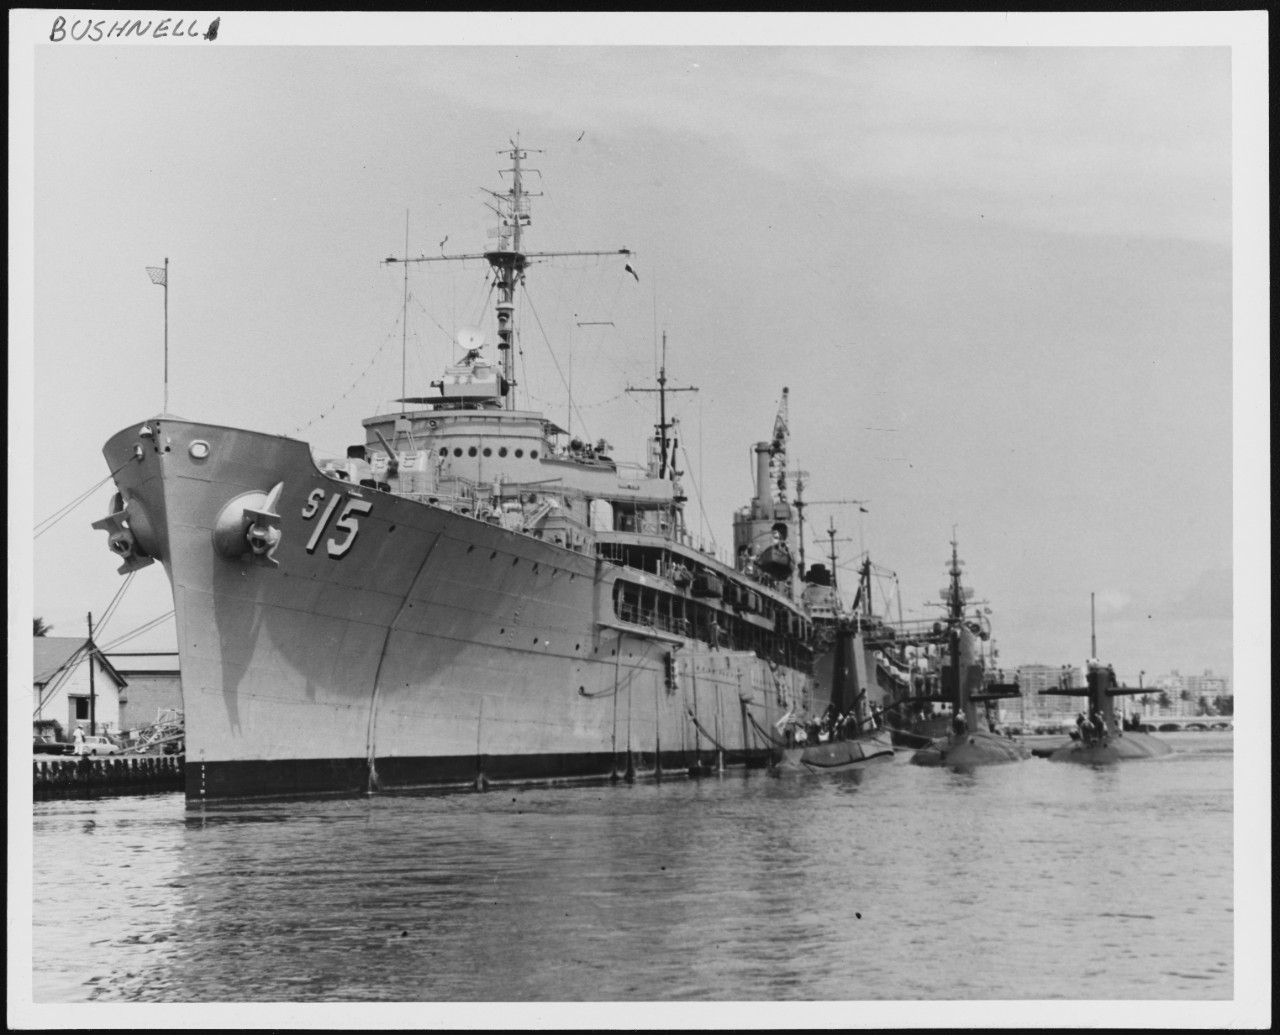 USS Bushnell AS 15 ship Old Photo 